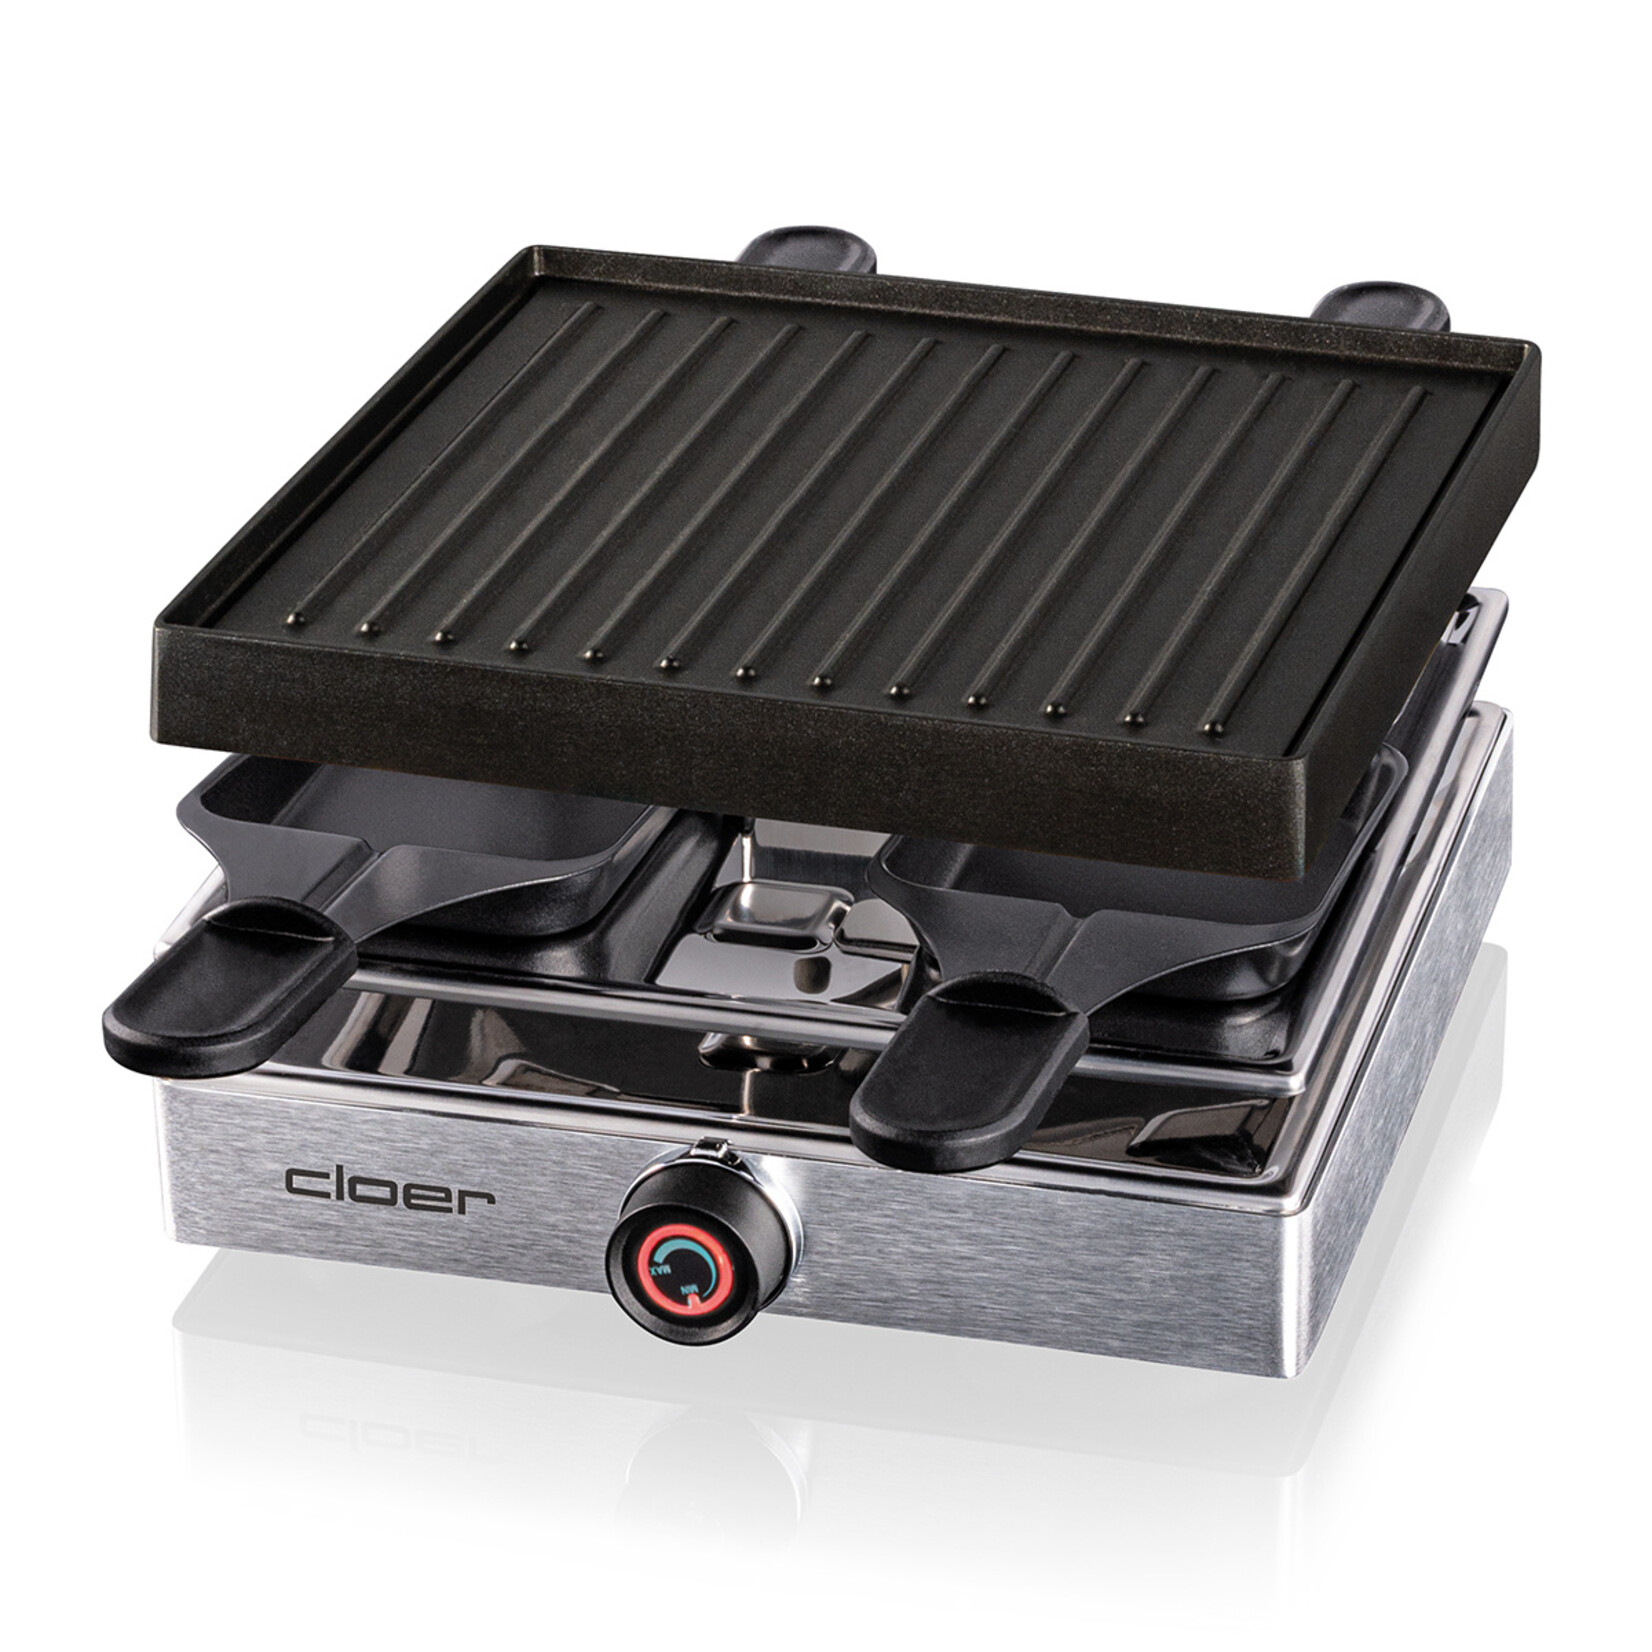 Cloer Cloer Raclette Grill (4 pers.) - 6454